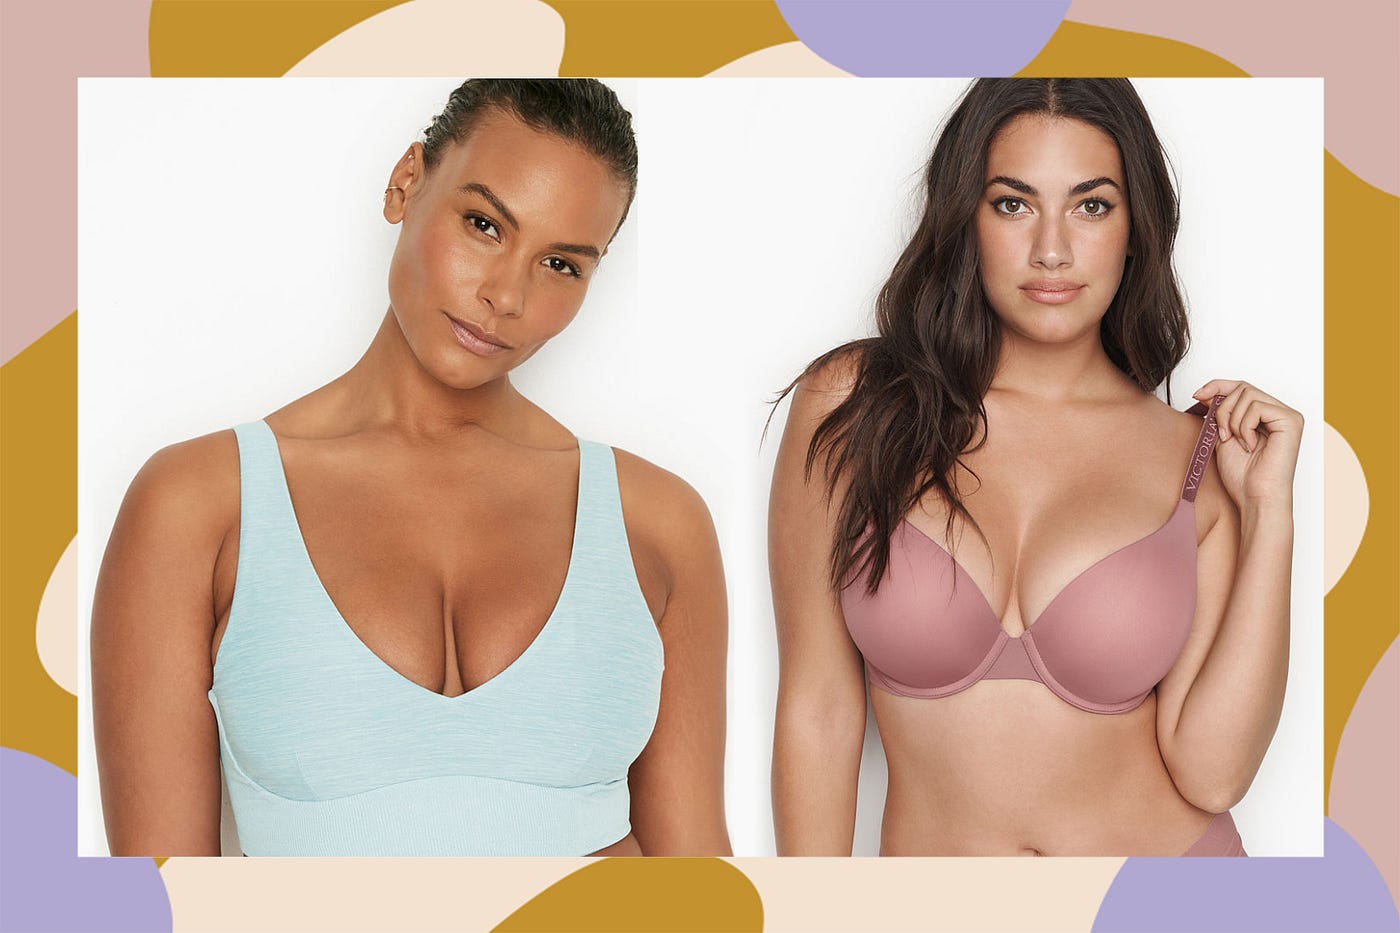 8 Benefits of Wearing a Push-up Bra You Should Know